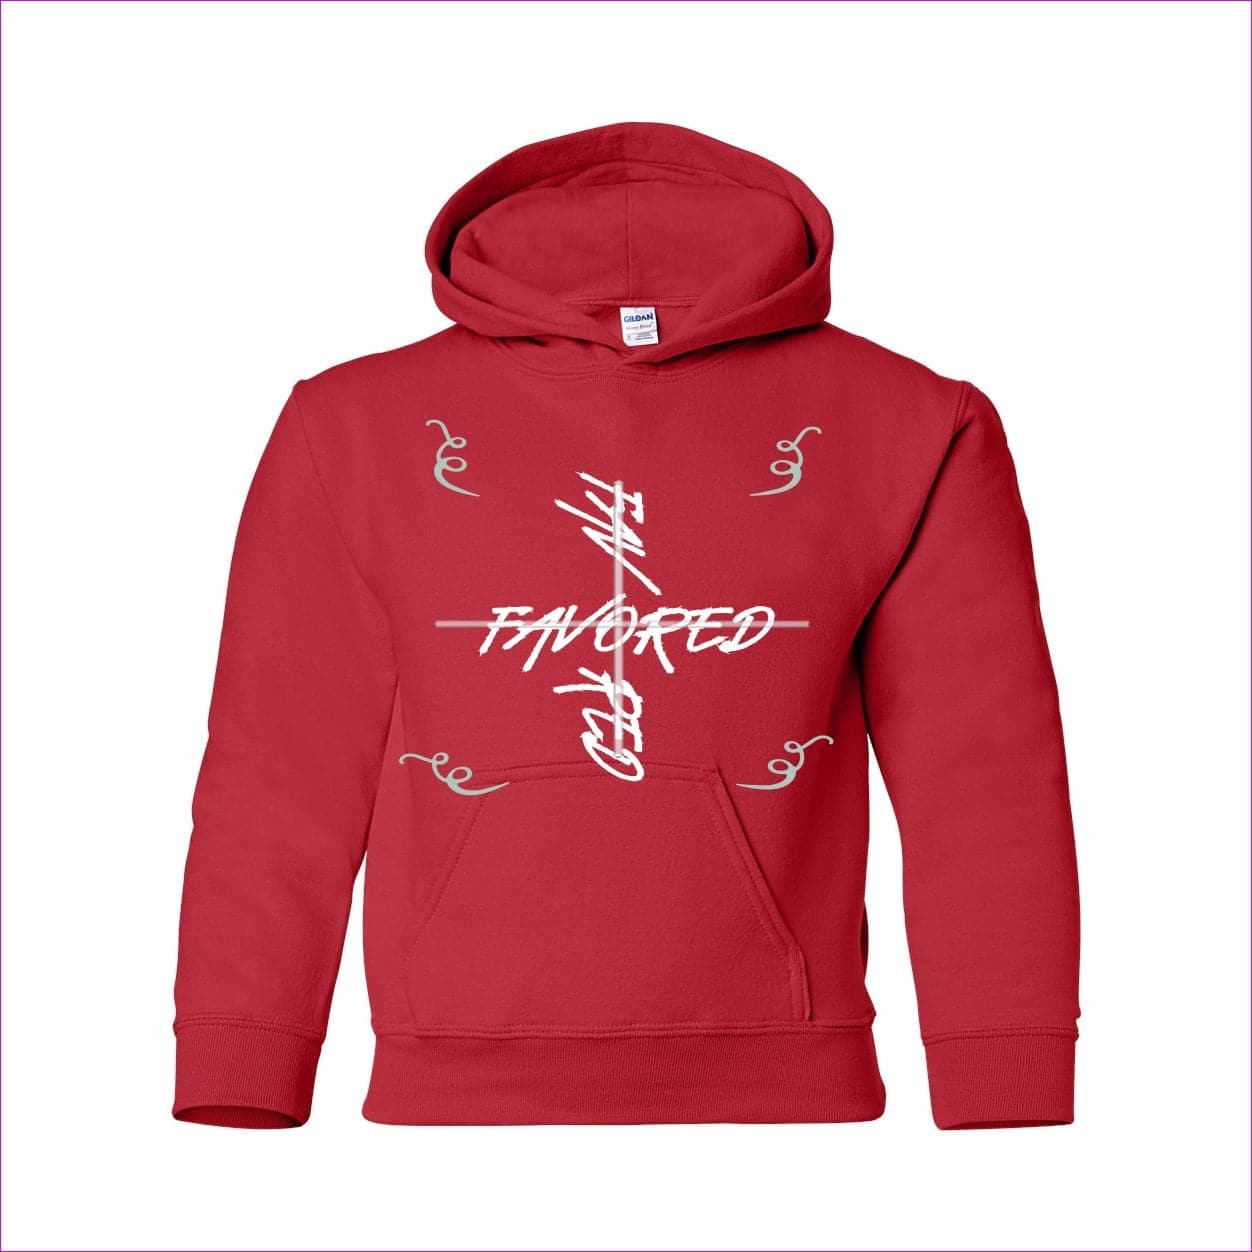 Red - Favored 2 Heavy Blend Youth Hooded Sweatshirt - kids hoodies at TFC&H Co.